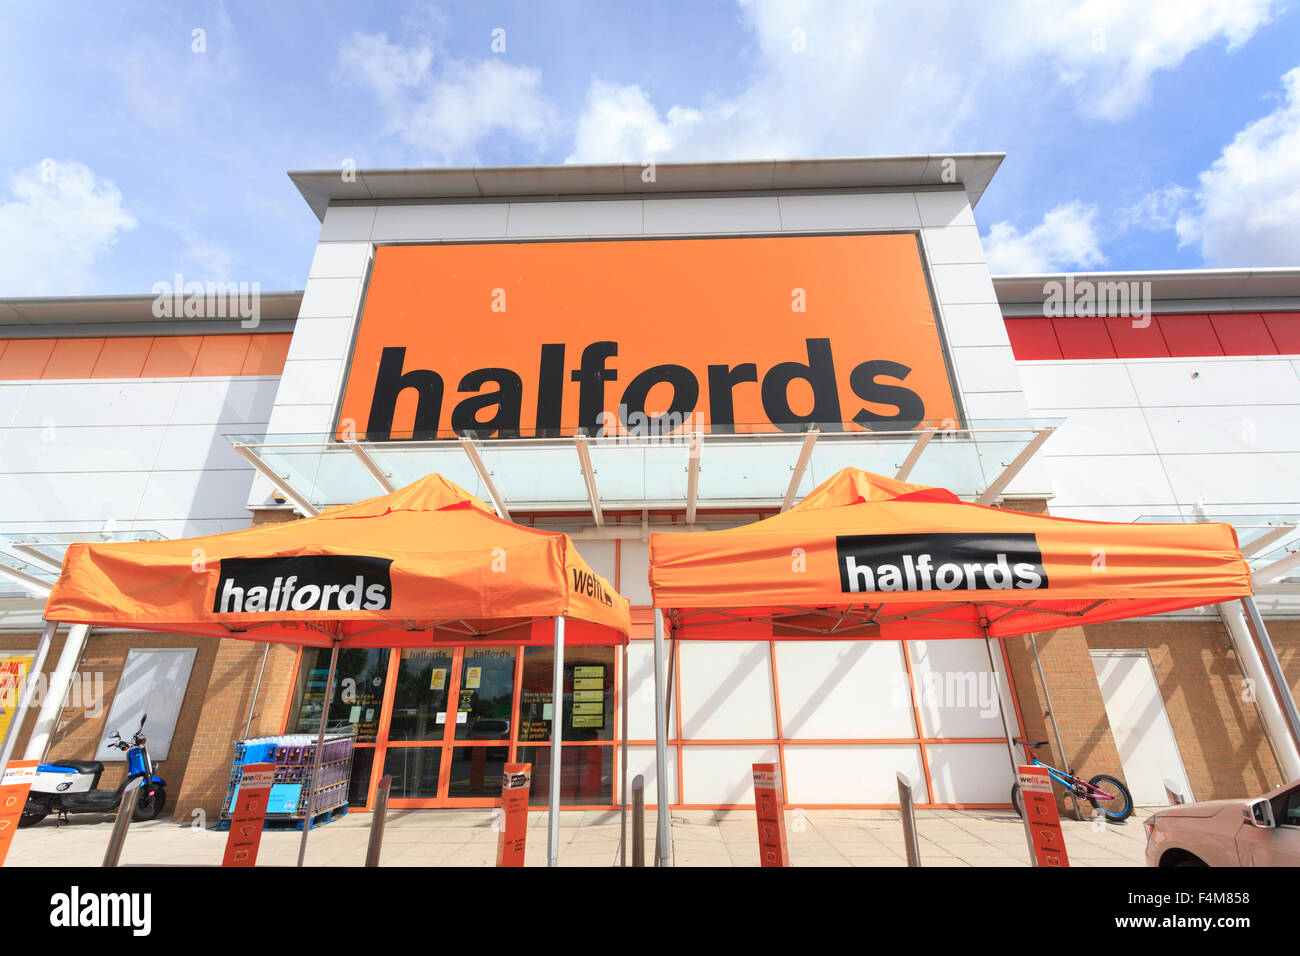 Exterior of Halfords store without people Stock Photo